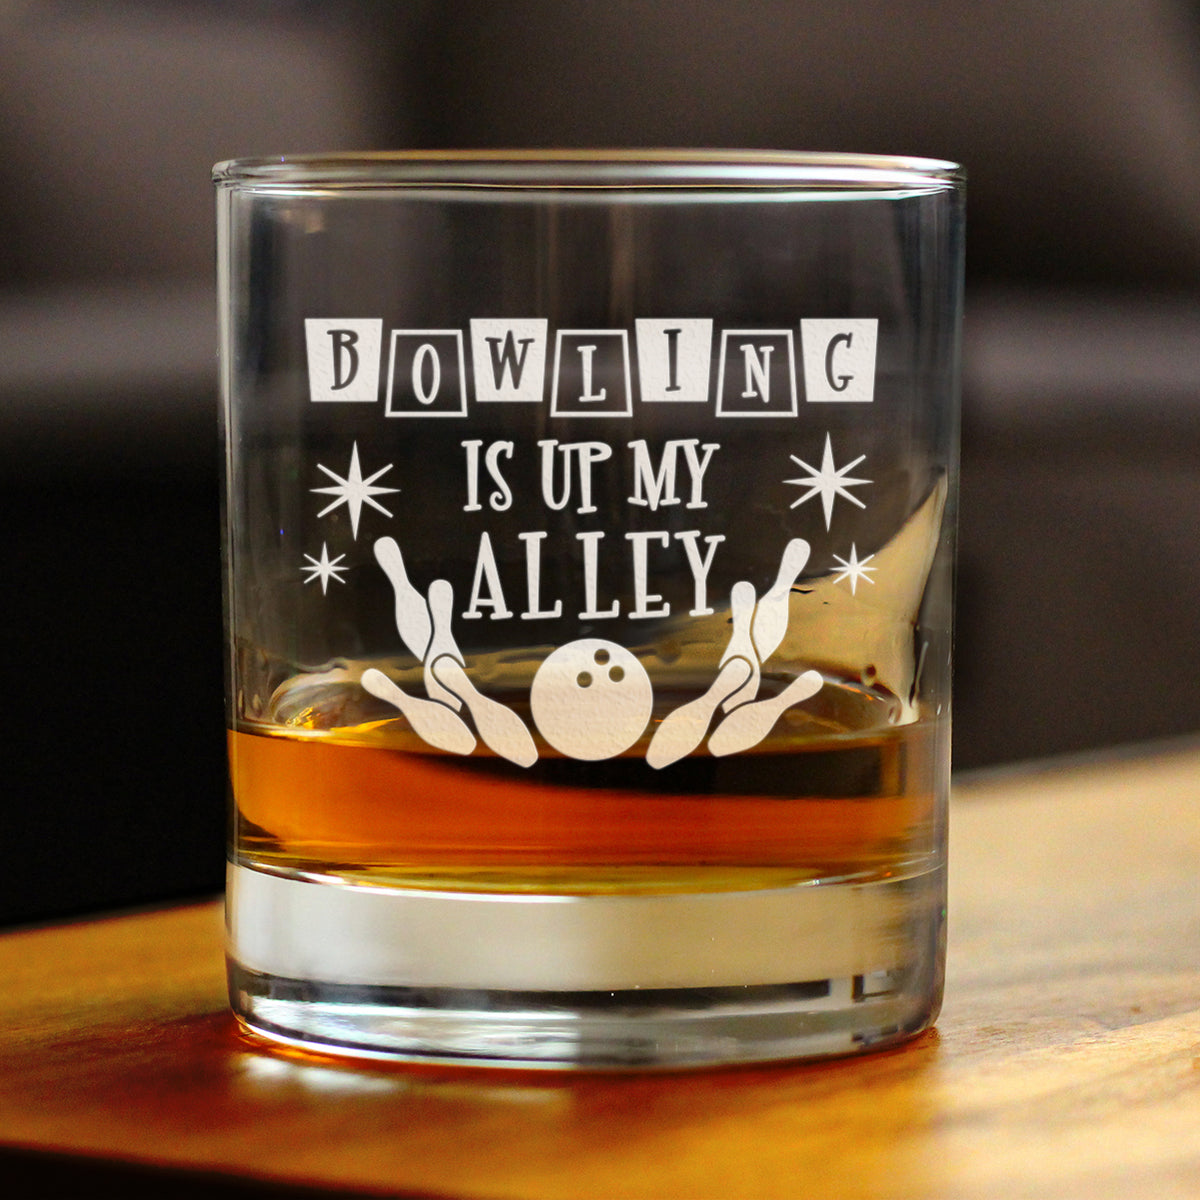 Bowling Alley Is Up My Alley - Whiskey Rocks Glass - Funny Bowling Themed Gifts and Decor for Bowlers - 10.25 Oz Glass